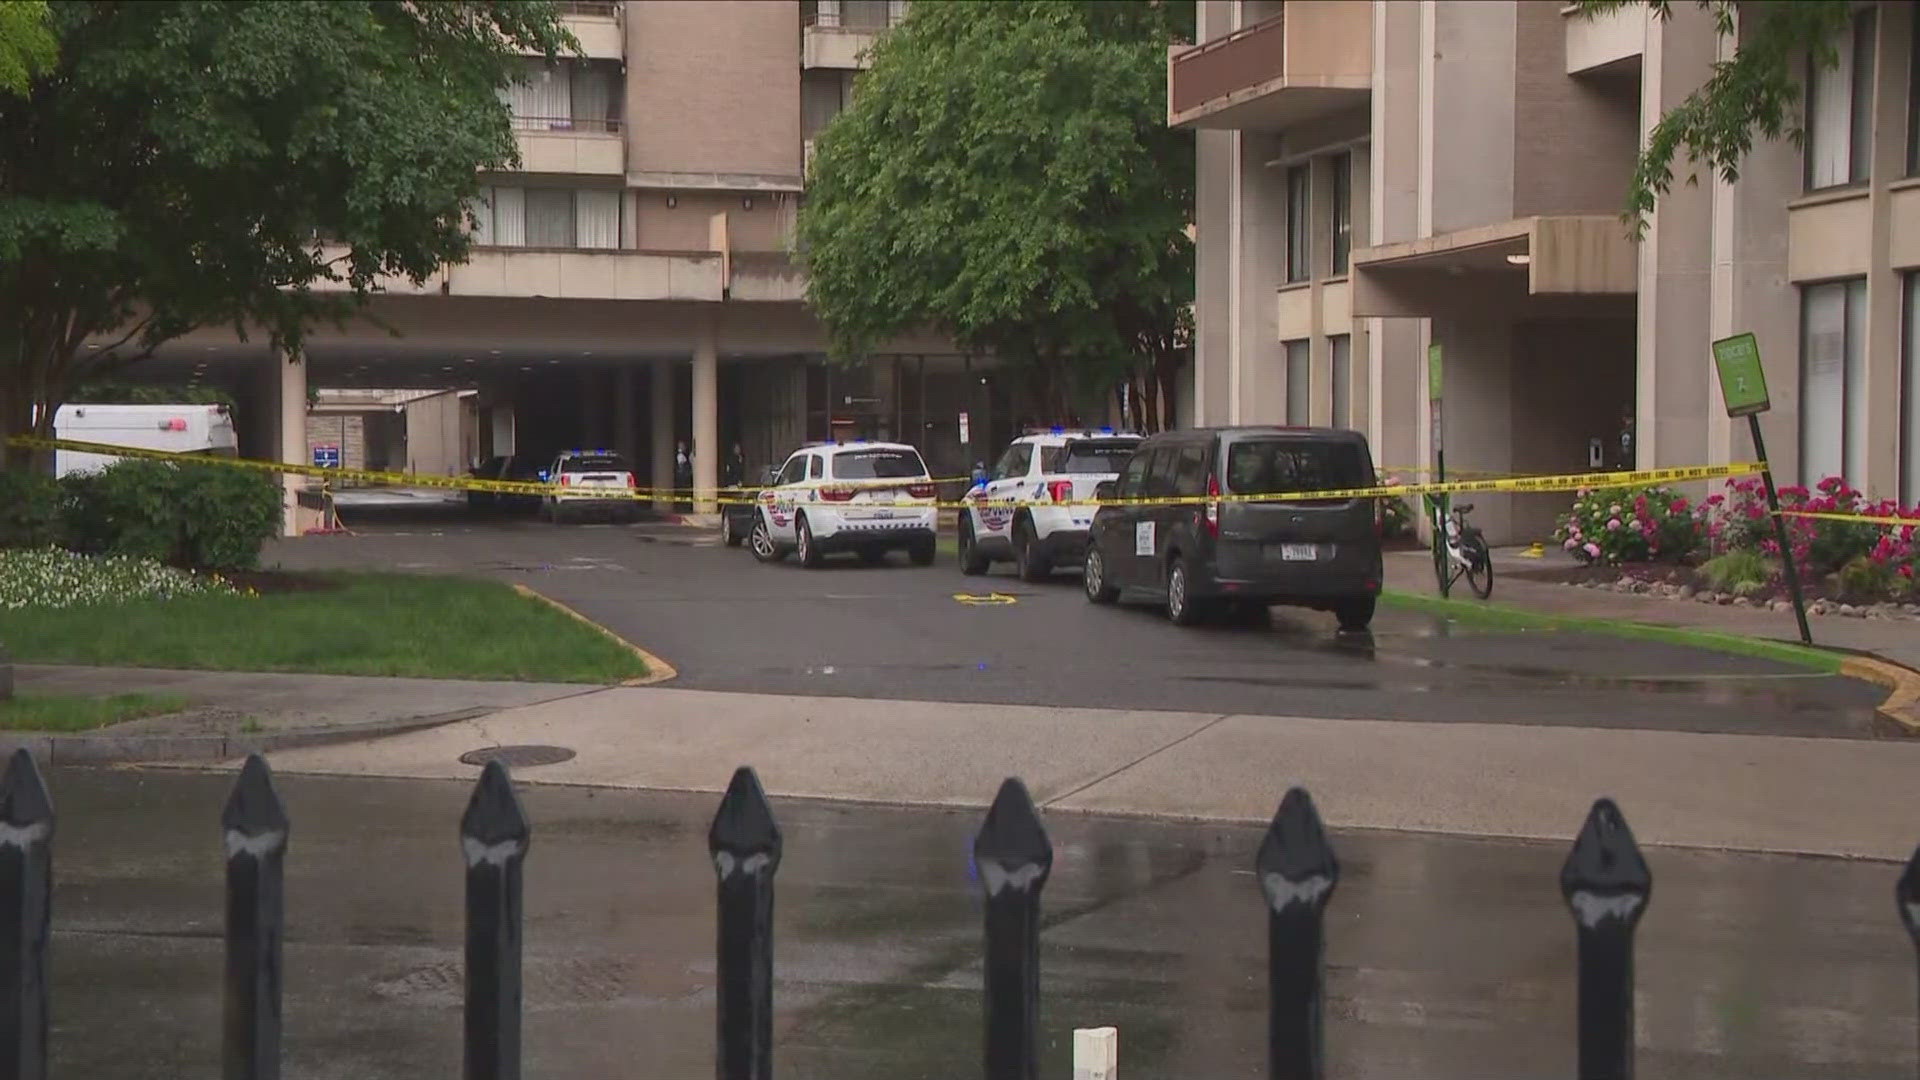 Police confirmed an officer shot and injured a man at an apartment complex along Virginia Avenue.